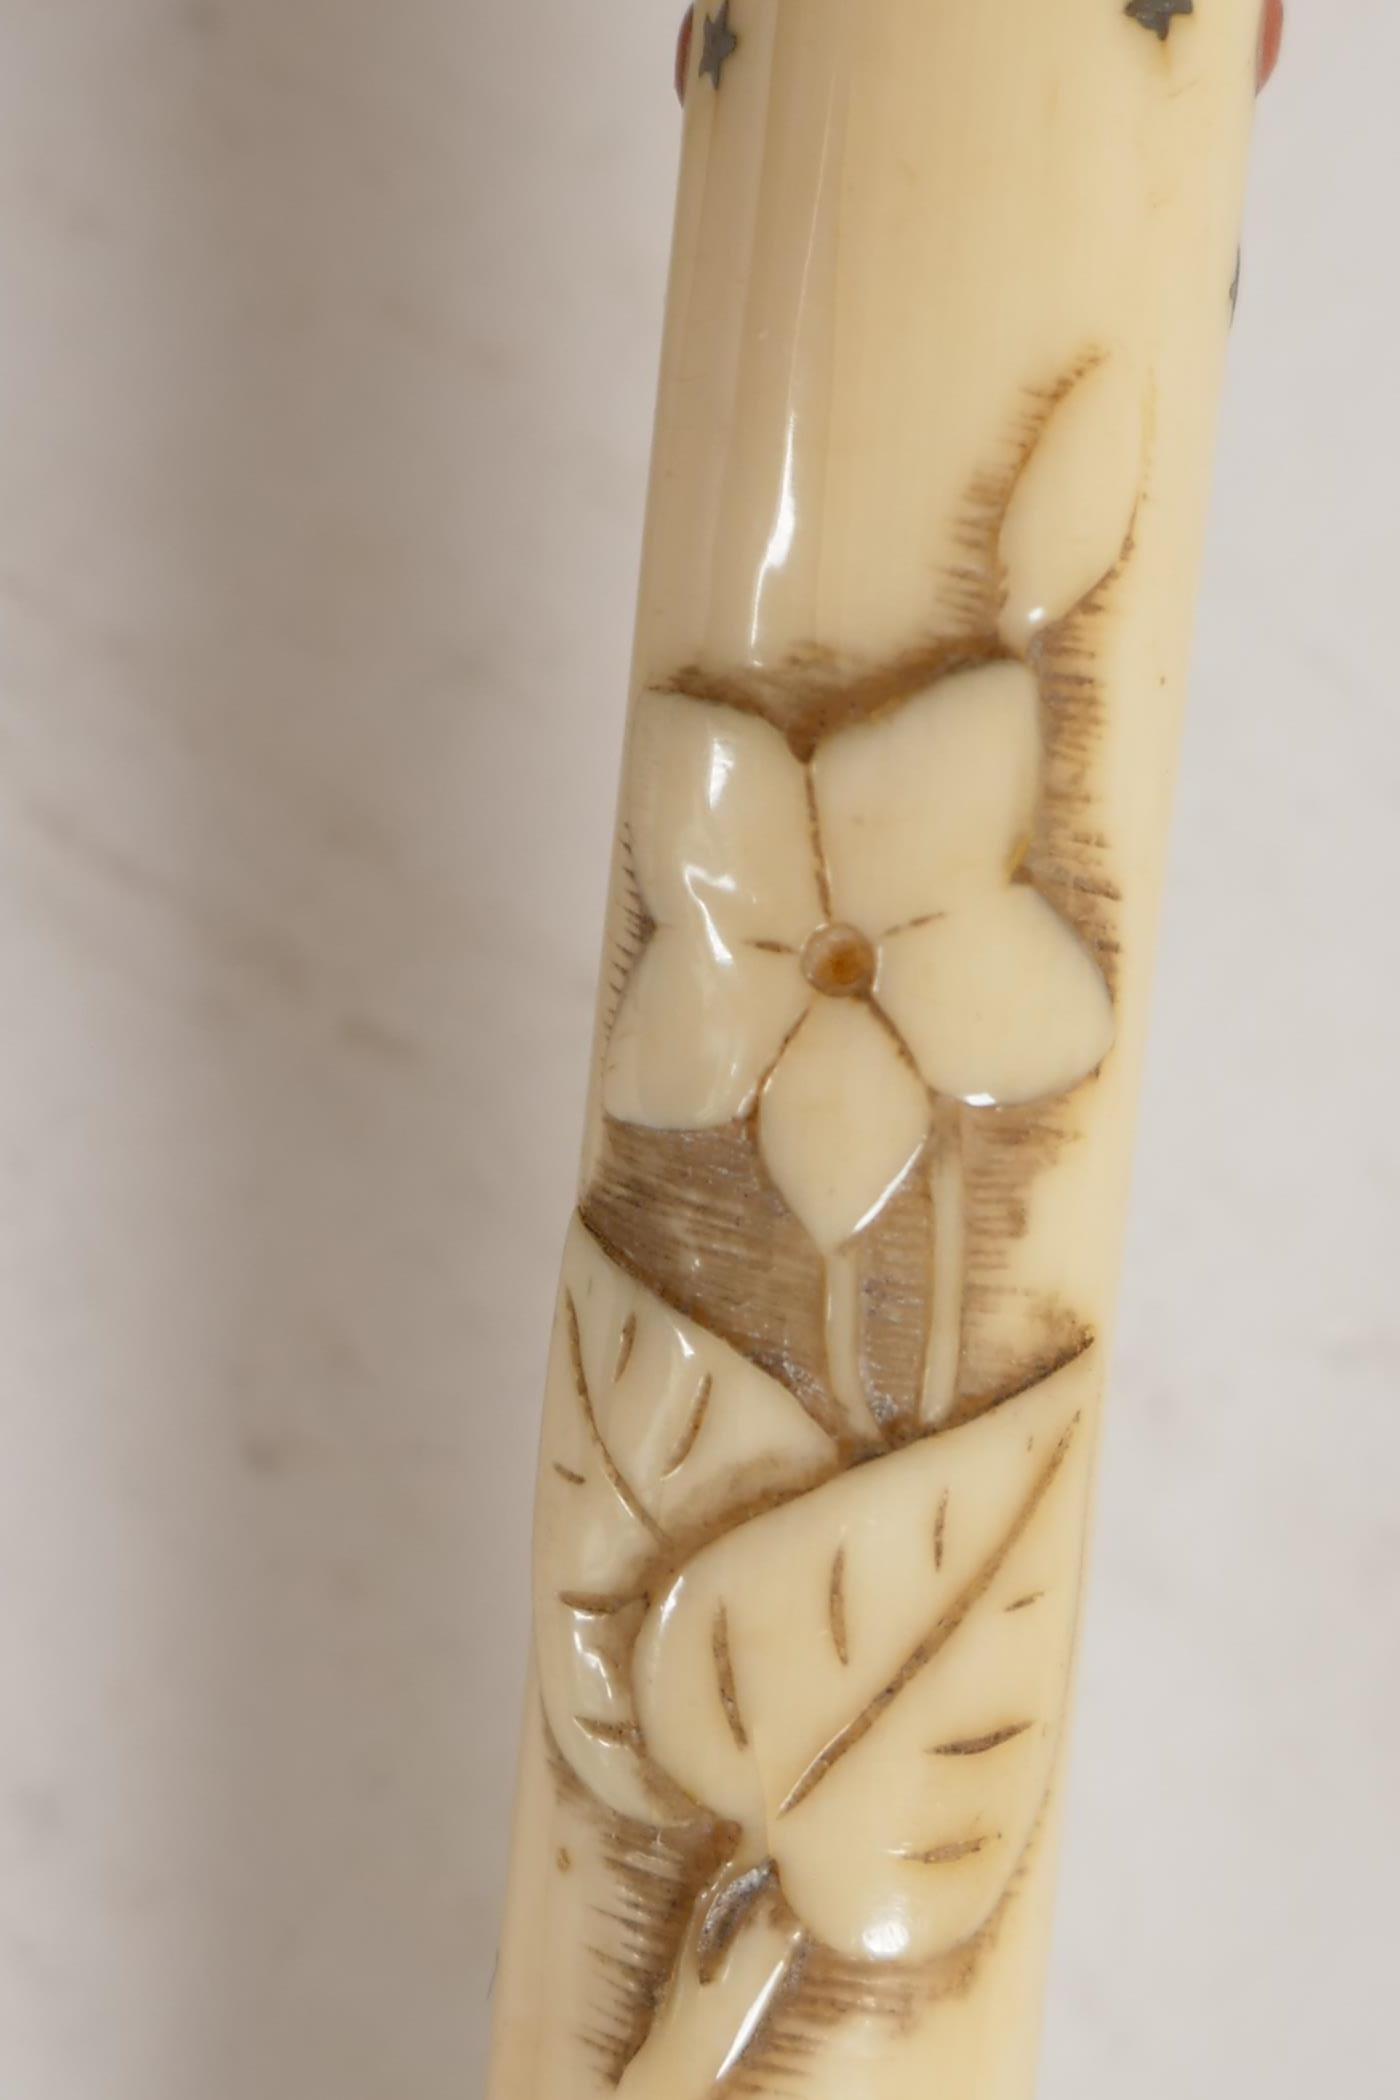 A C19th Japanese carved ivory parasol handle, inset with jewels and metals in the shybiyana - Image 3 of 5